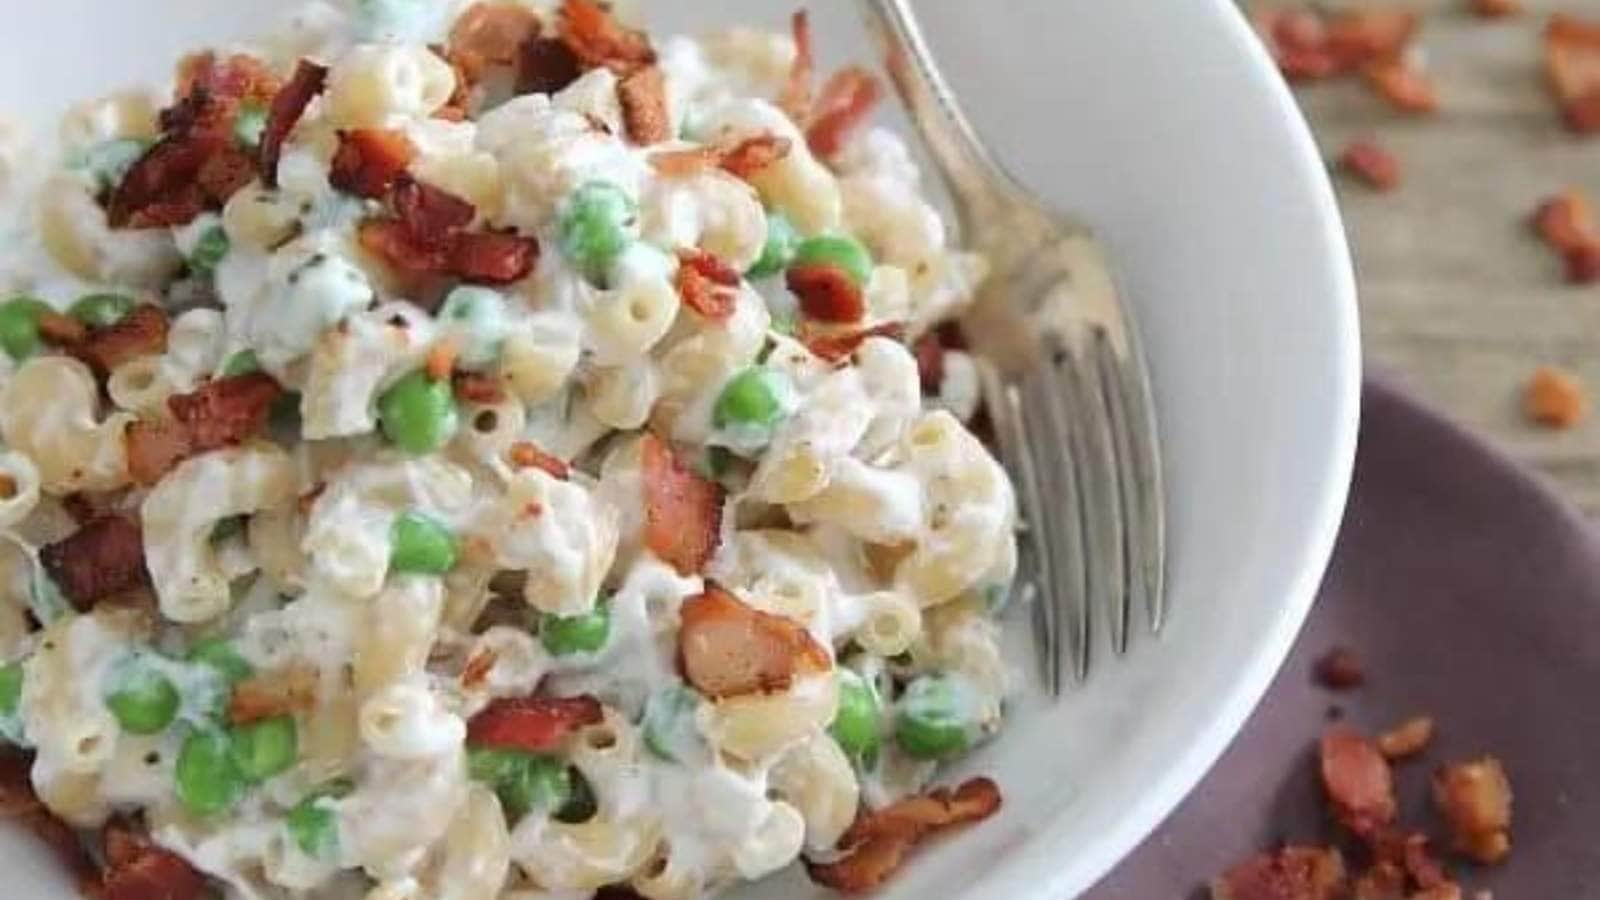 Greek Yogurt Mac'n Cheese With Peas And Bacon recipe by Running To The Kitchen.